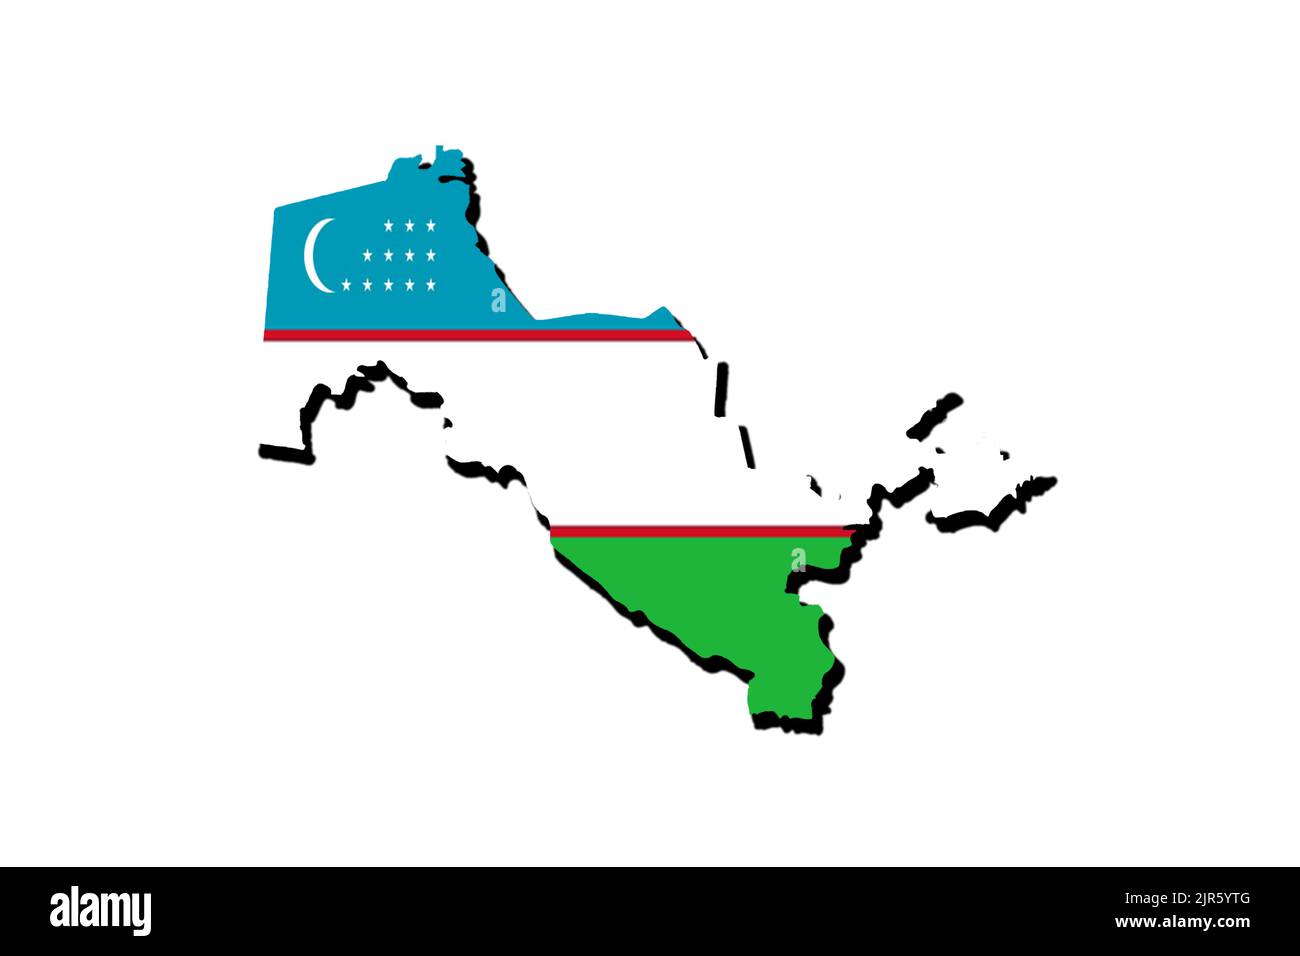 Silhouette of the map of Uzbekistan with its flag Stock Photo